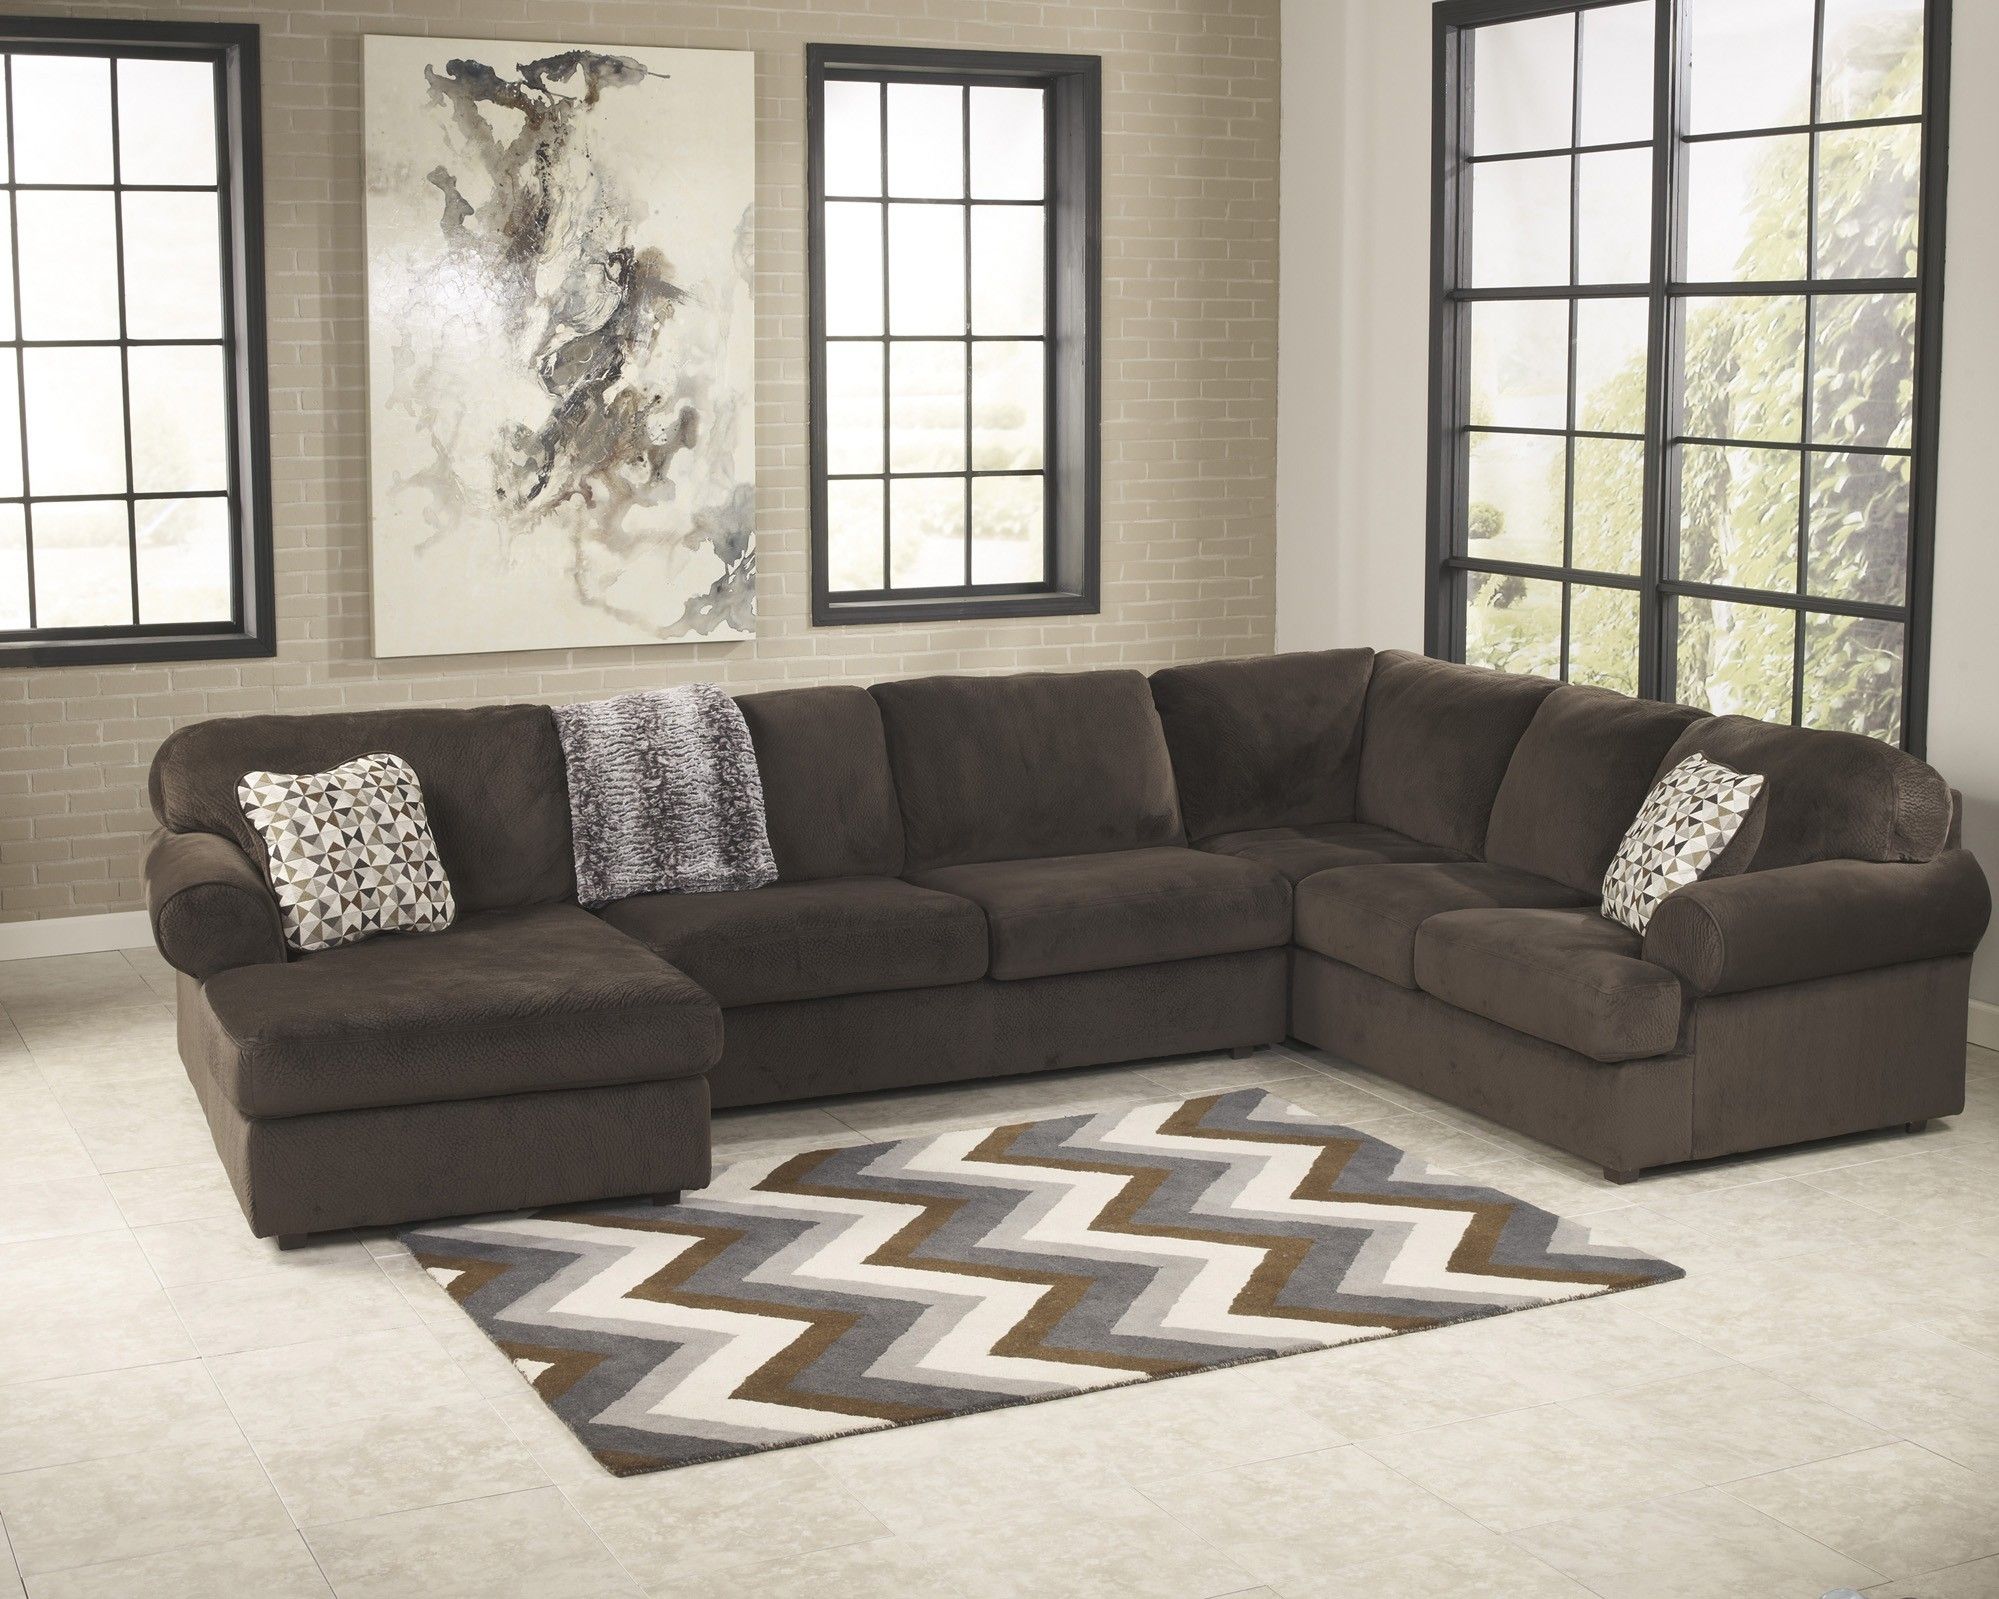 Jessa Place Chocolate 3 Piece Sectional Sofa For $790.00 – Furnitureusa Throughout Elk Grove Ca Sectional Sofas (Photo 3 of 10)